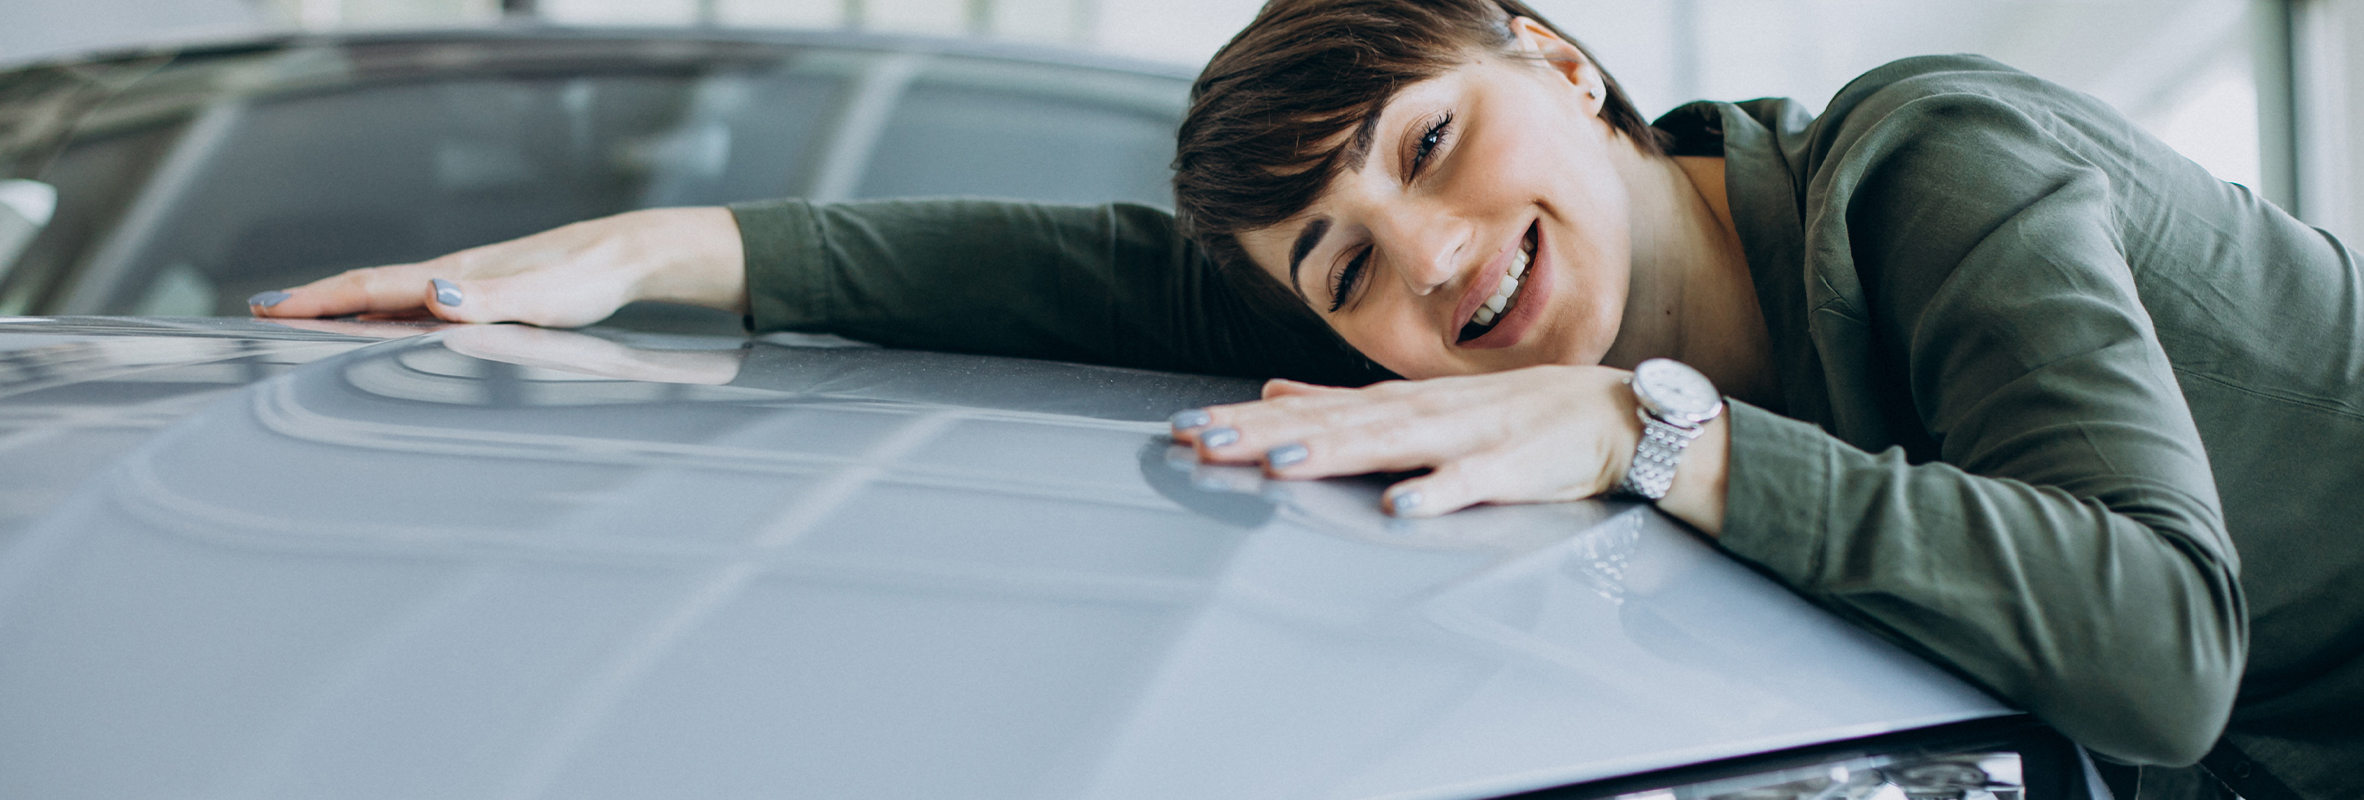 A woman rests her head on the hood of her shiny new car, smiling with satisfaction. She looks proud of her purchase and happy with her choice.